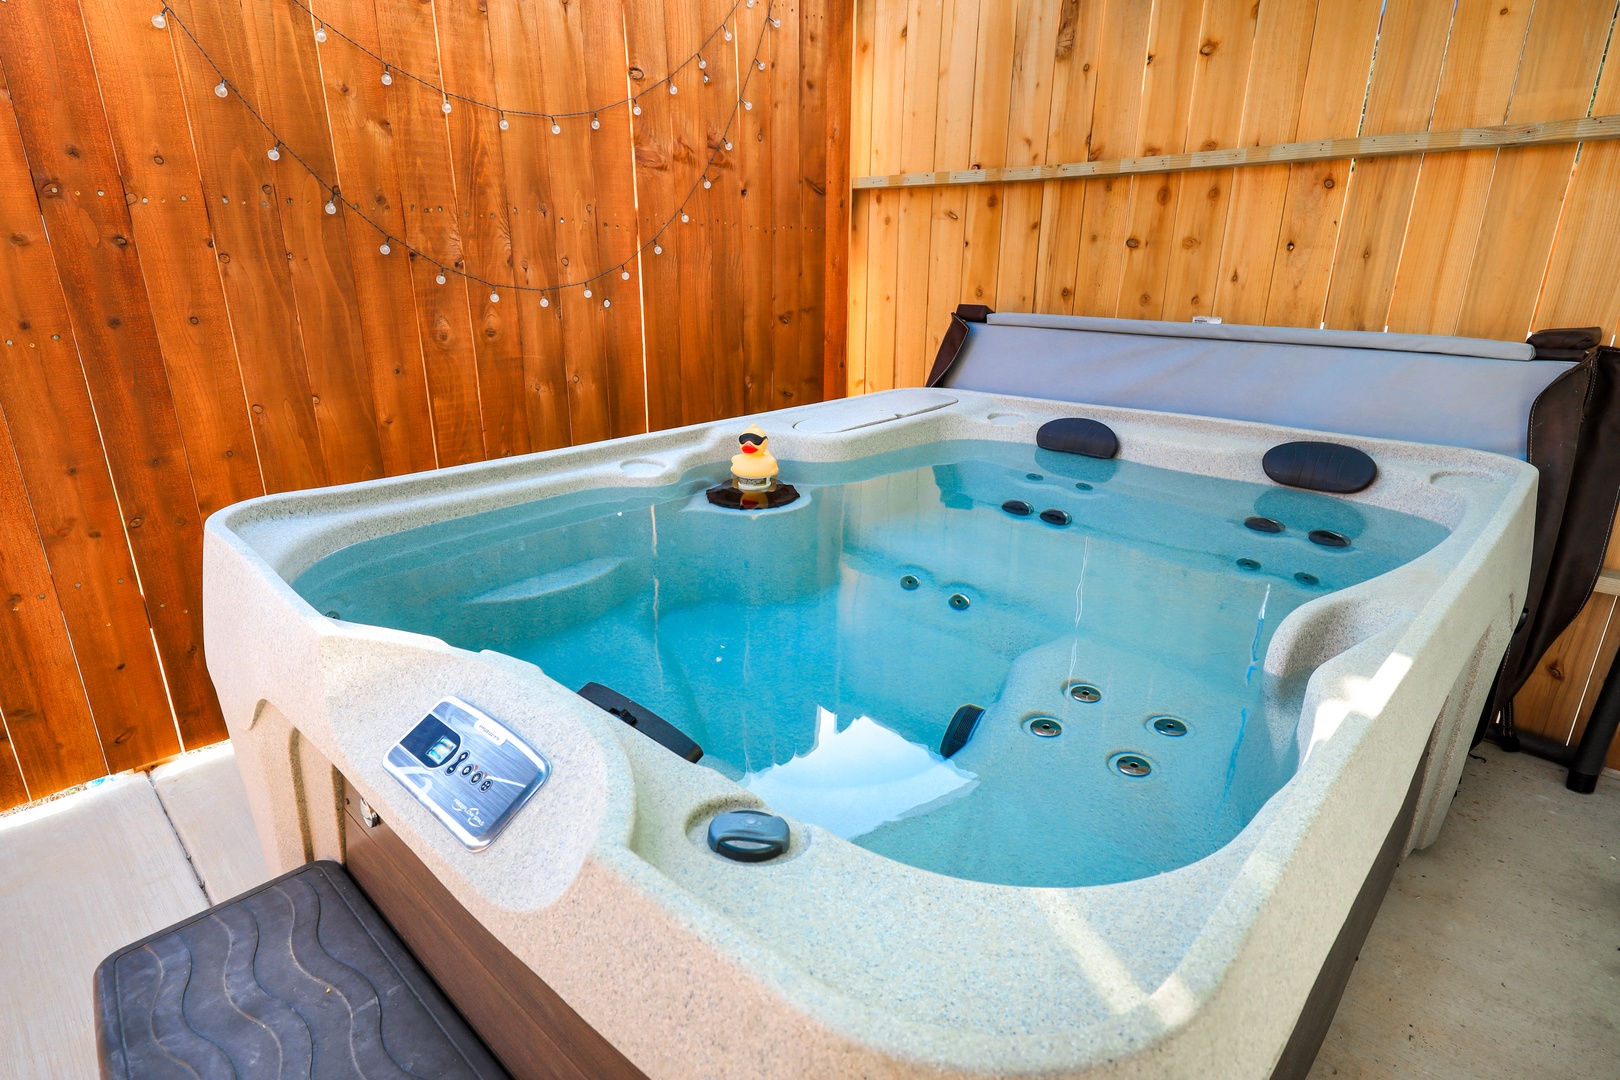 Soak your cares away on the private patio in your private hot tub